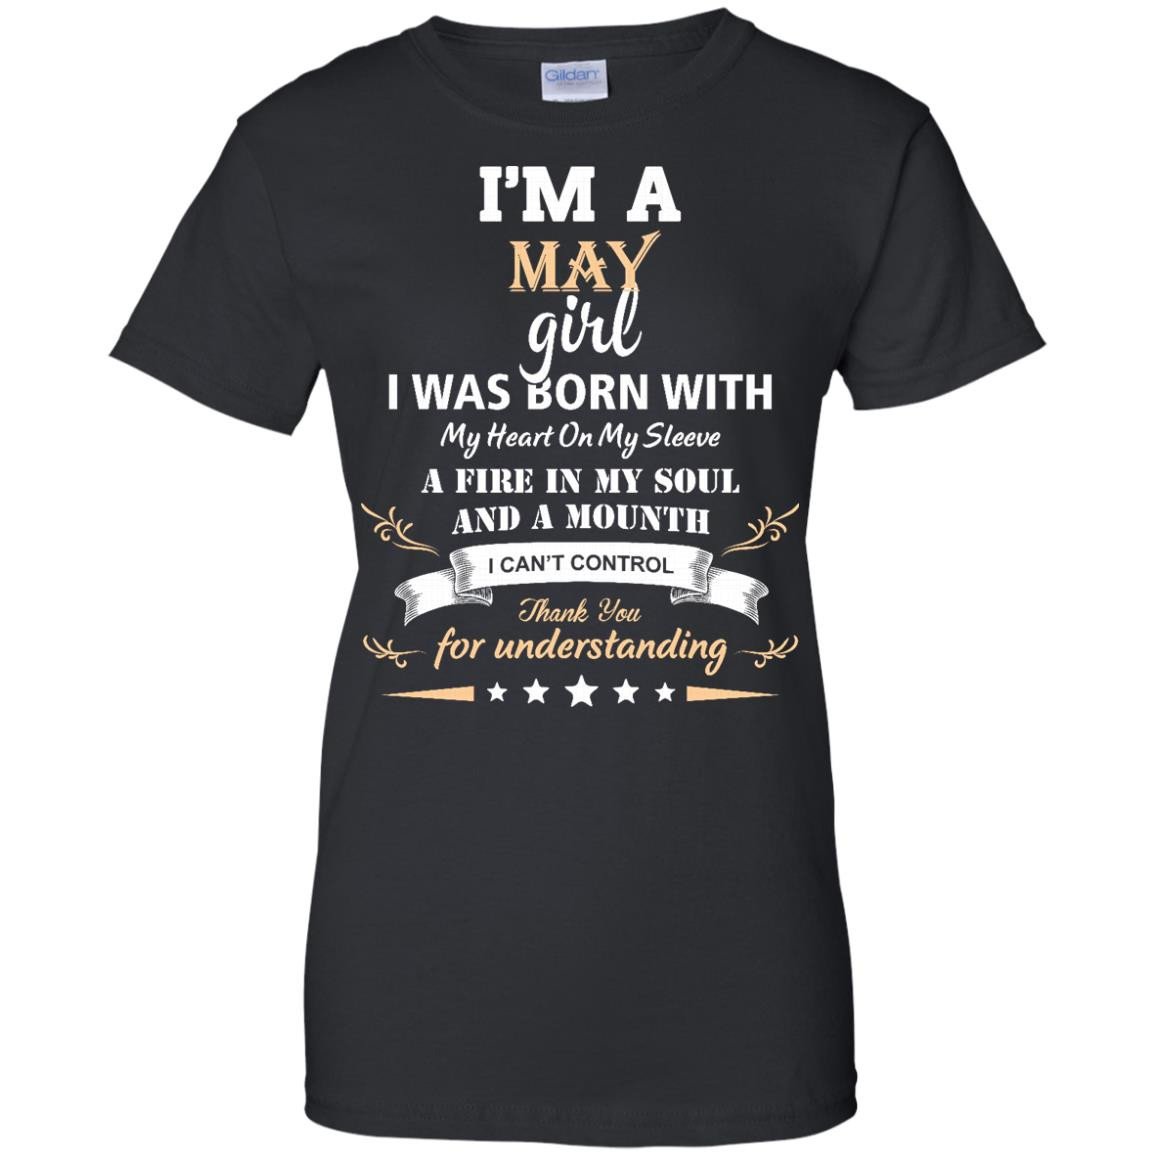 Im a May girl shirts - I was born with my heart on my sleeve a fine in ...